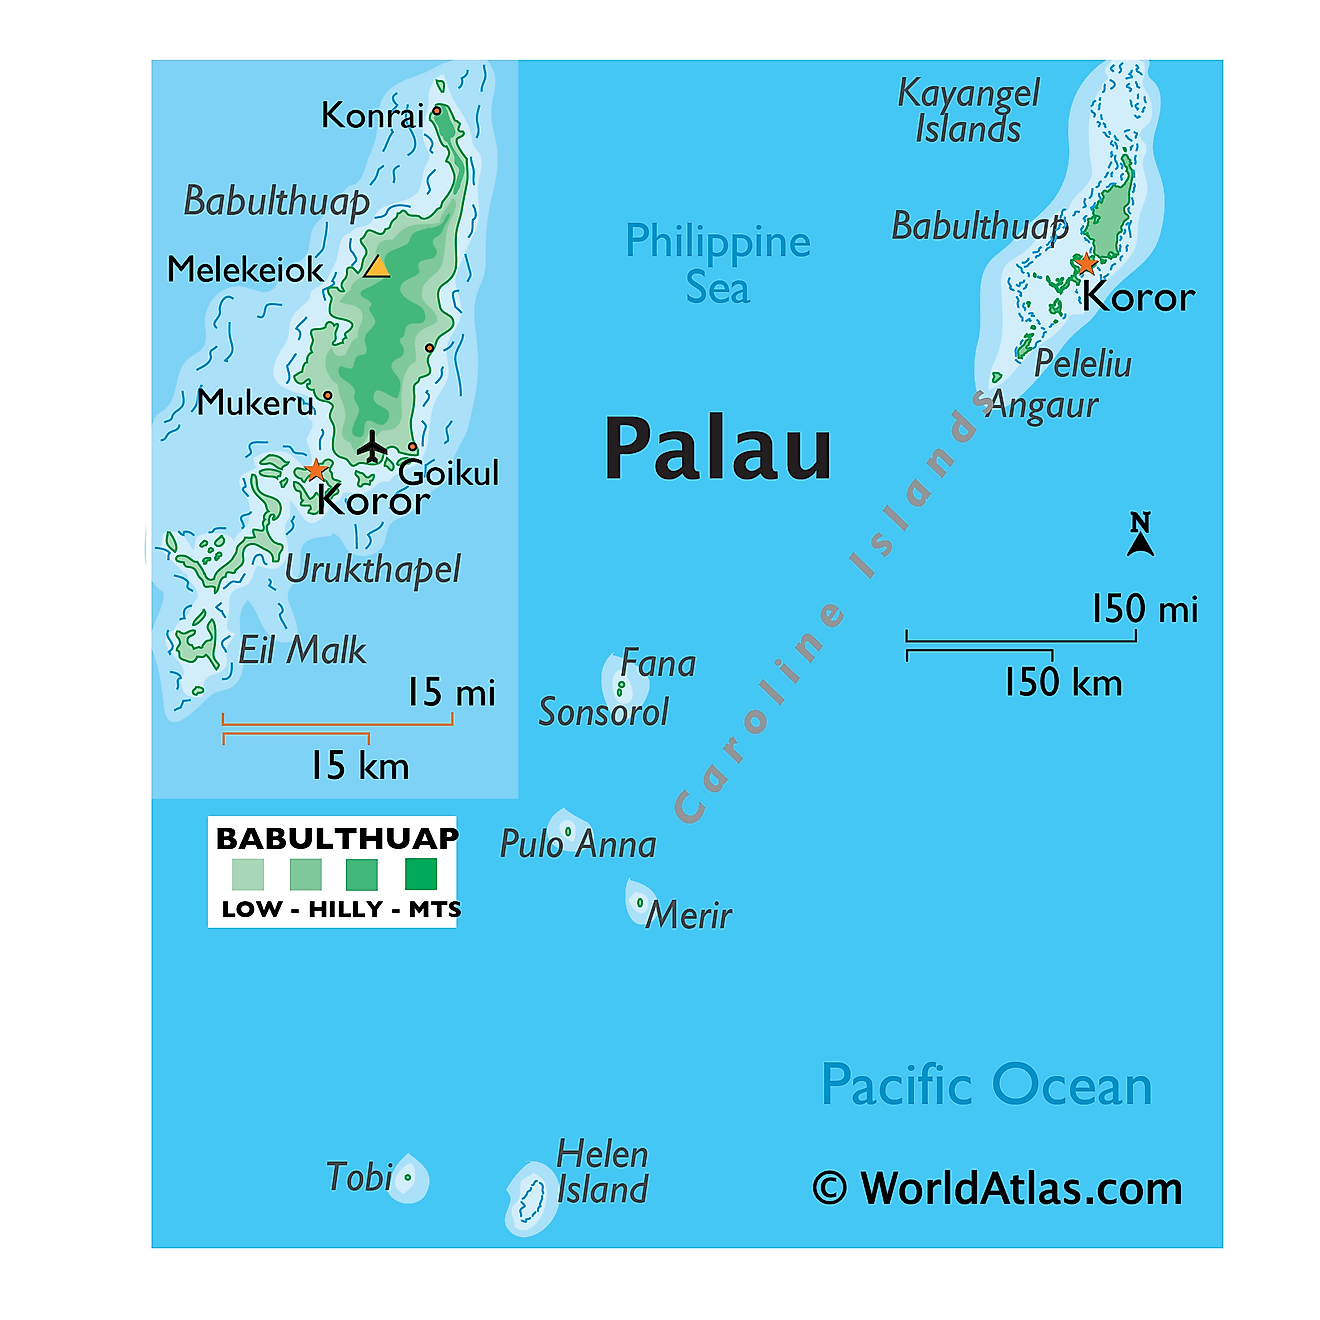 Physical Map of Palau showing its relief, islands, location, nearby islands, highest point, and more.